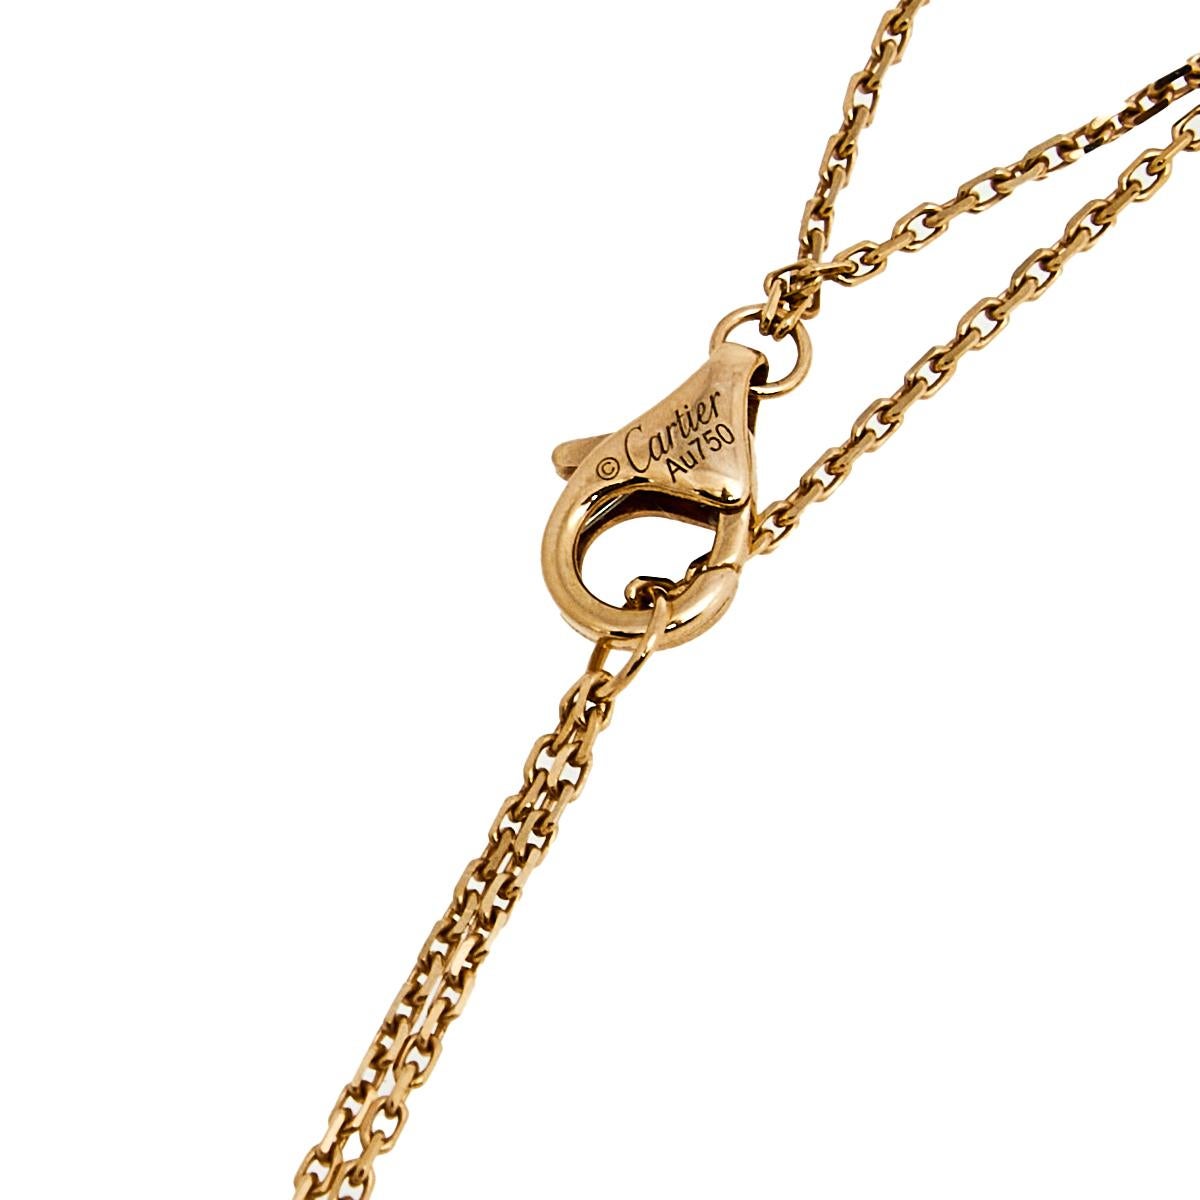 This minimalist necklace comes from Cartier's Trinity collection that symbolizes elegance and style. The 18k gold creation features dual chains that carry three-tone 18k gold rings—a signature of the collection symbolizing love, fidelity, and